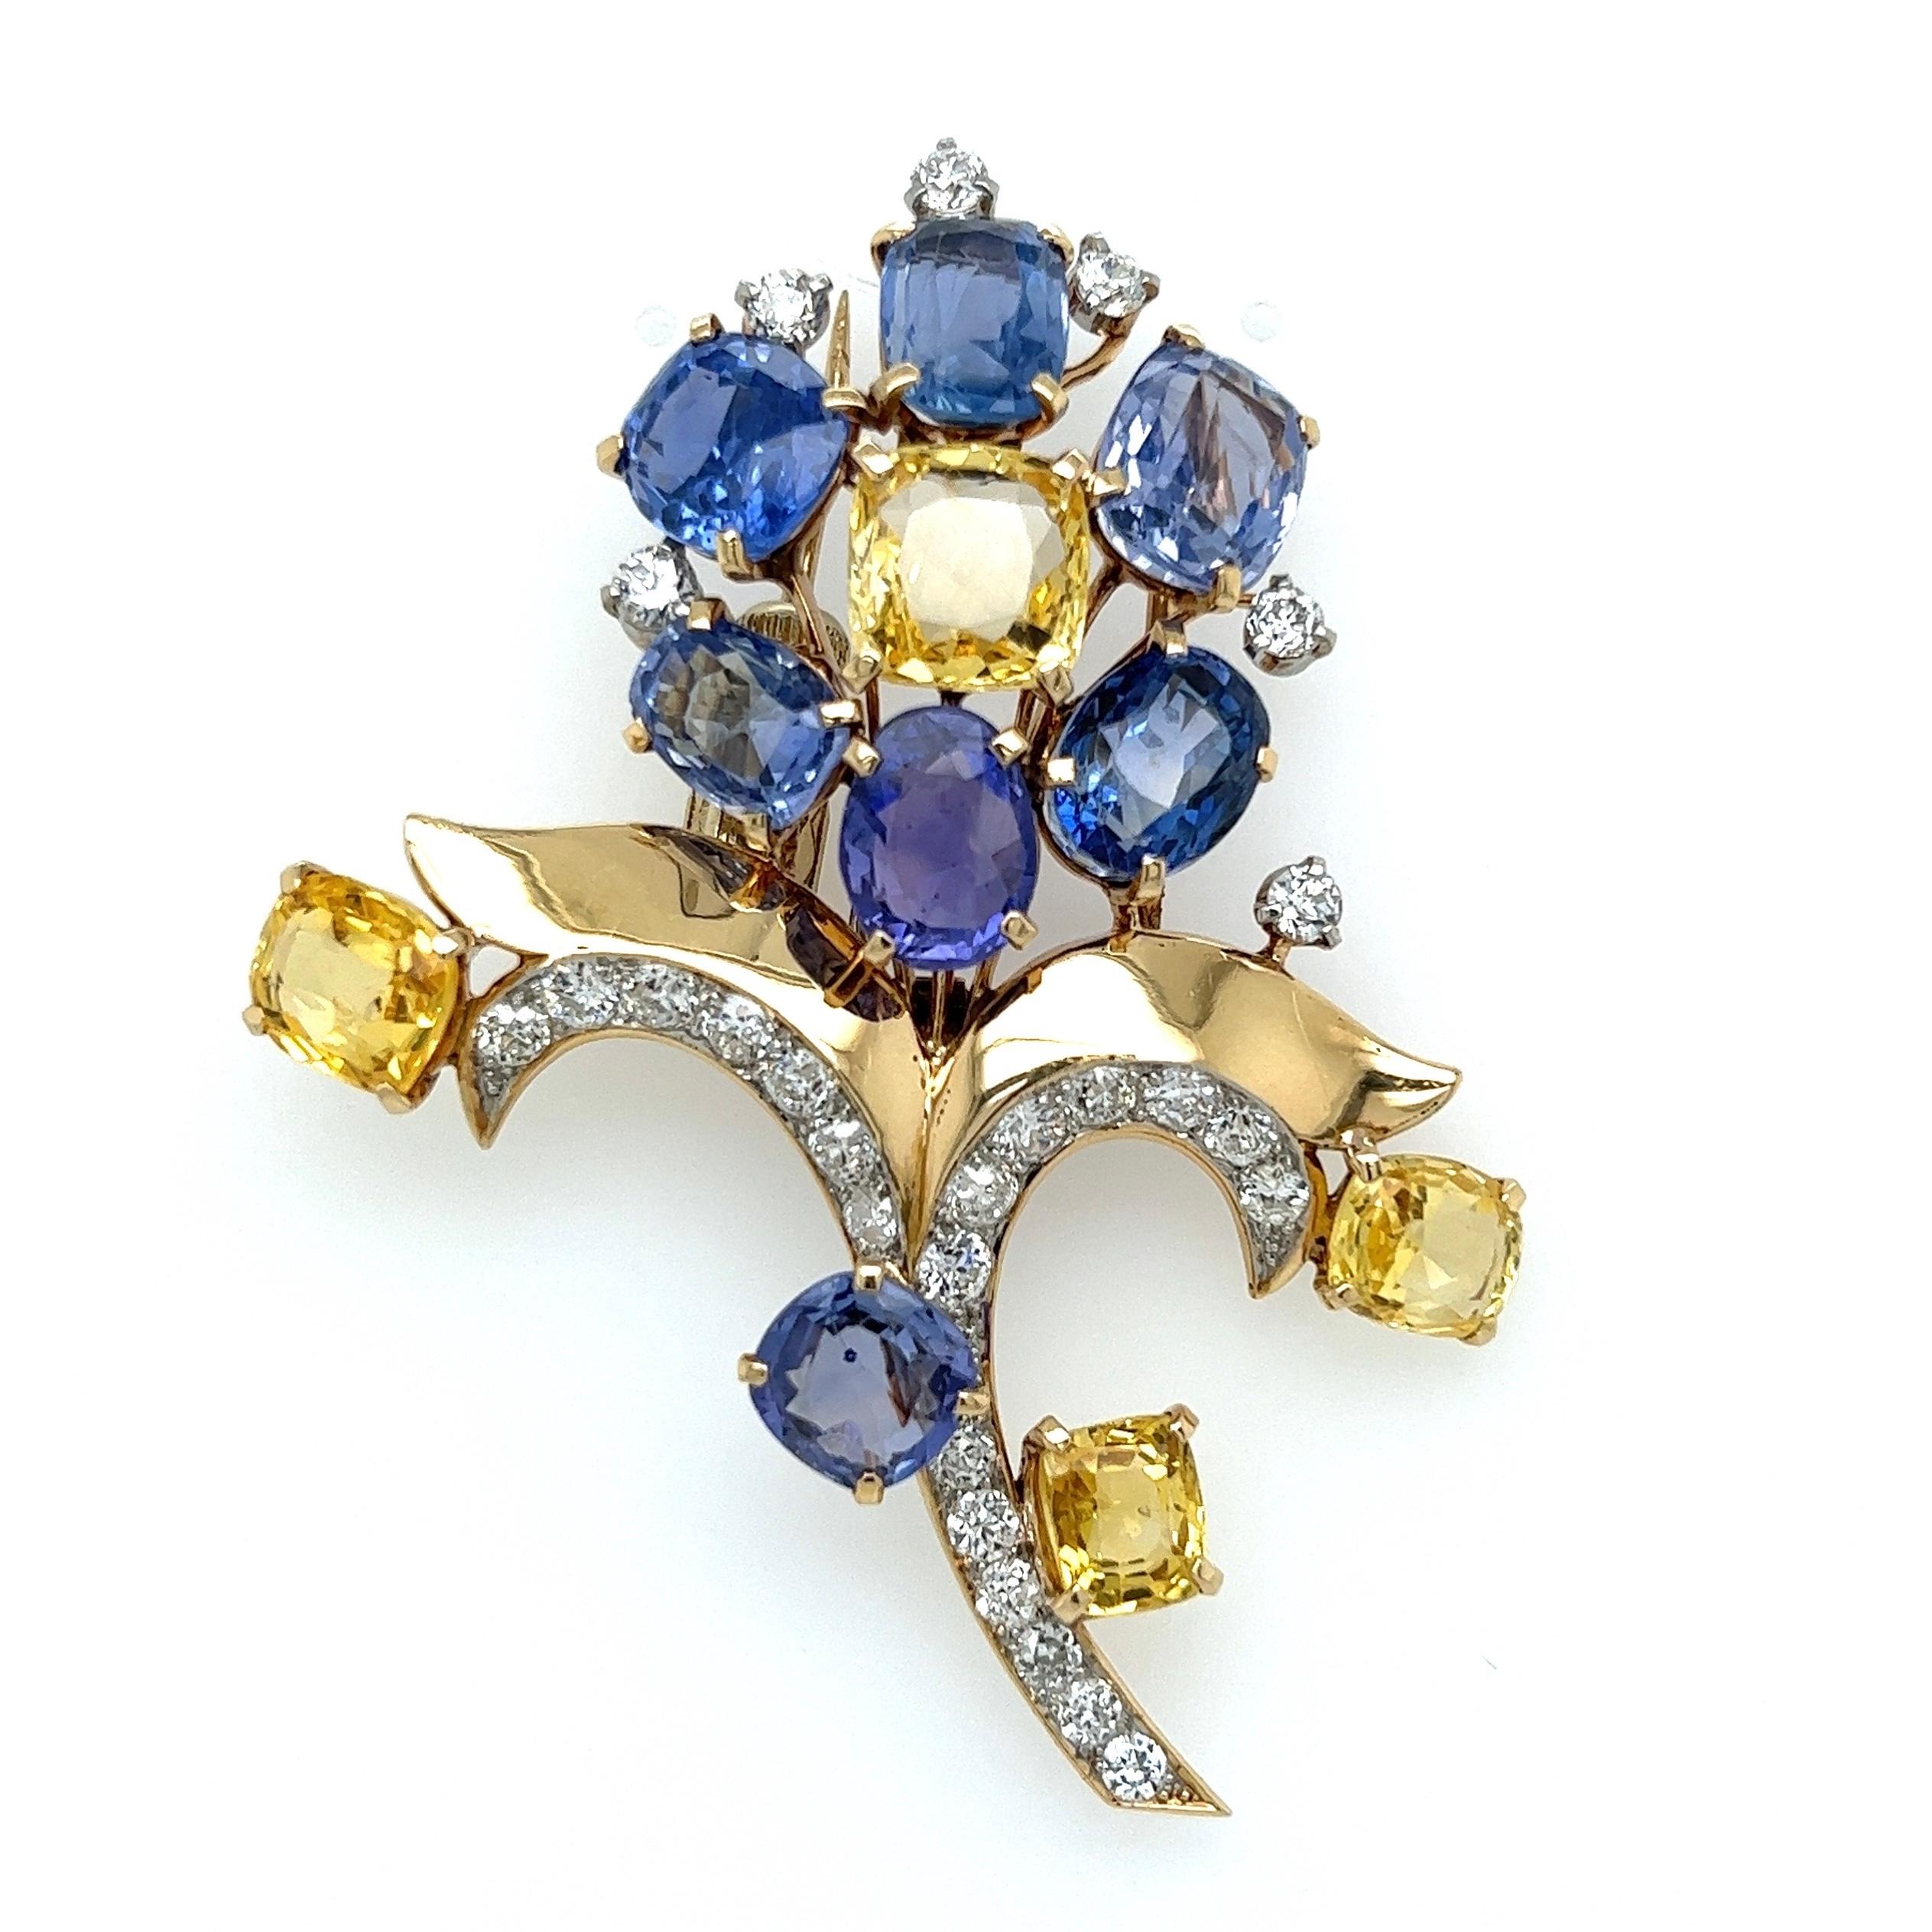 Simply Beautiful! Stylish and finely detailed Mid Century Modern CARTIER Blue and Yellow Sapphires and Diamond Floral Brooch Pin. Securely nestled, Hand set Center Yellow Sapphire 9.3x8.8x5.2mm approx. 4.25ct. Blue Sapphire 11.1x7.3x5.40mm, approx.